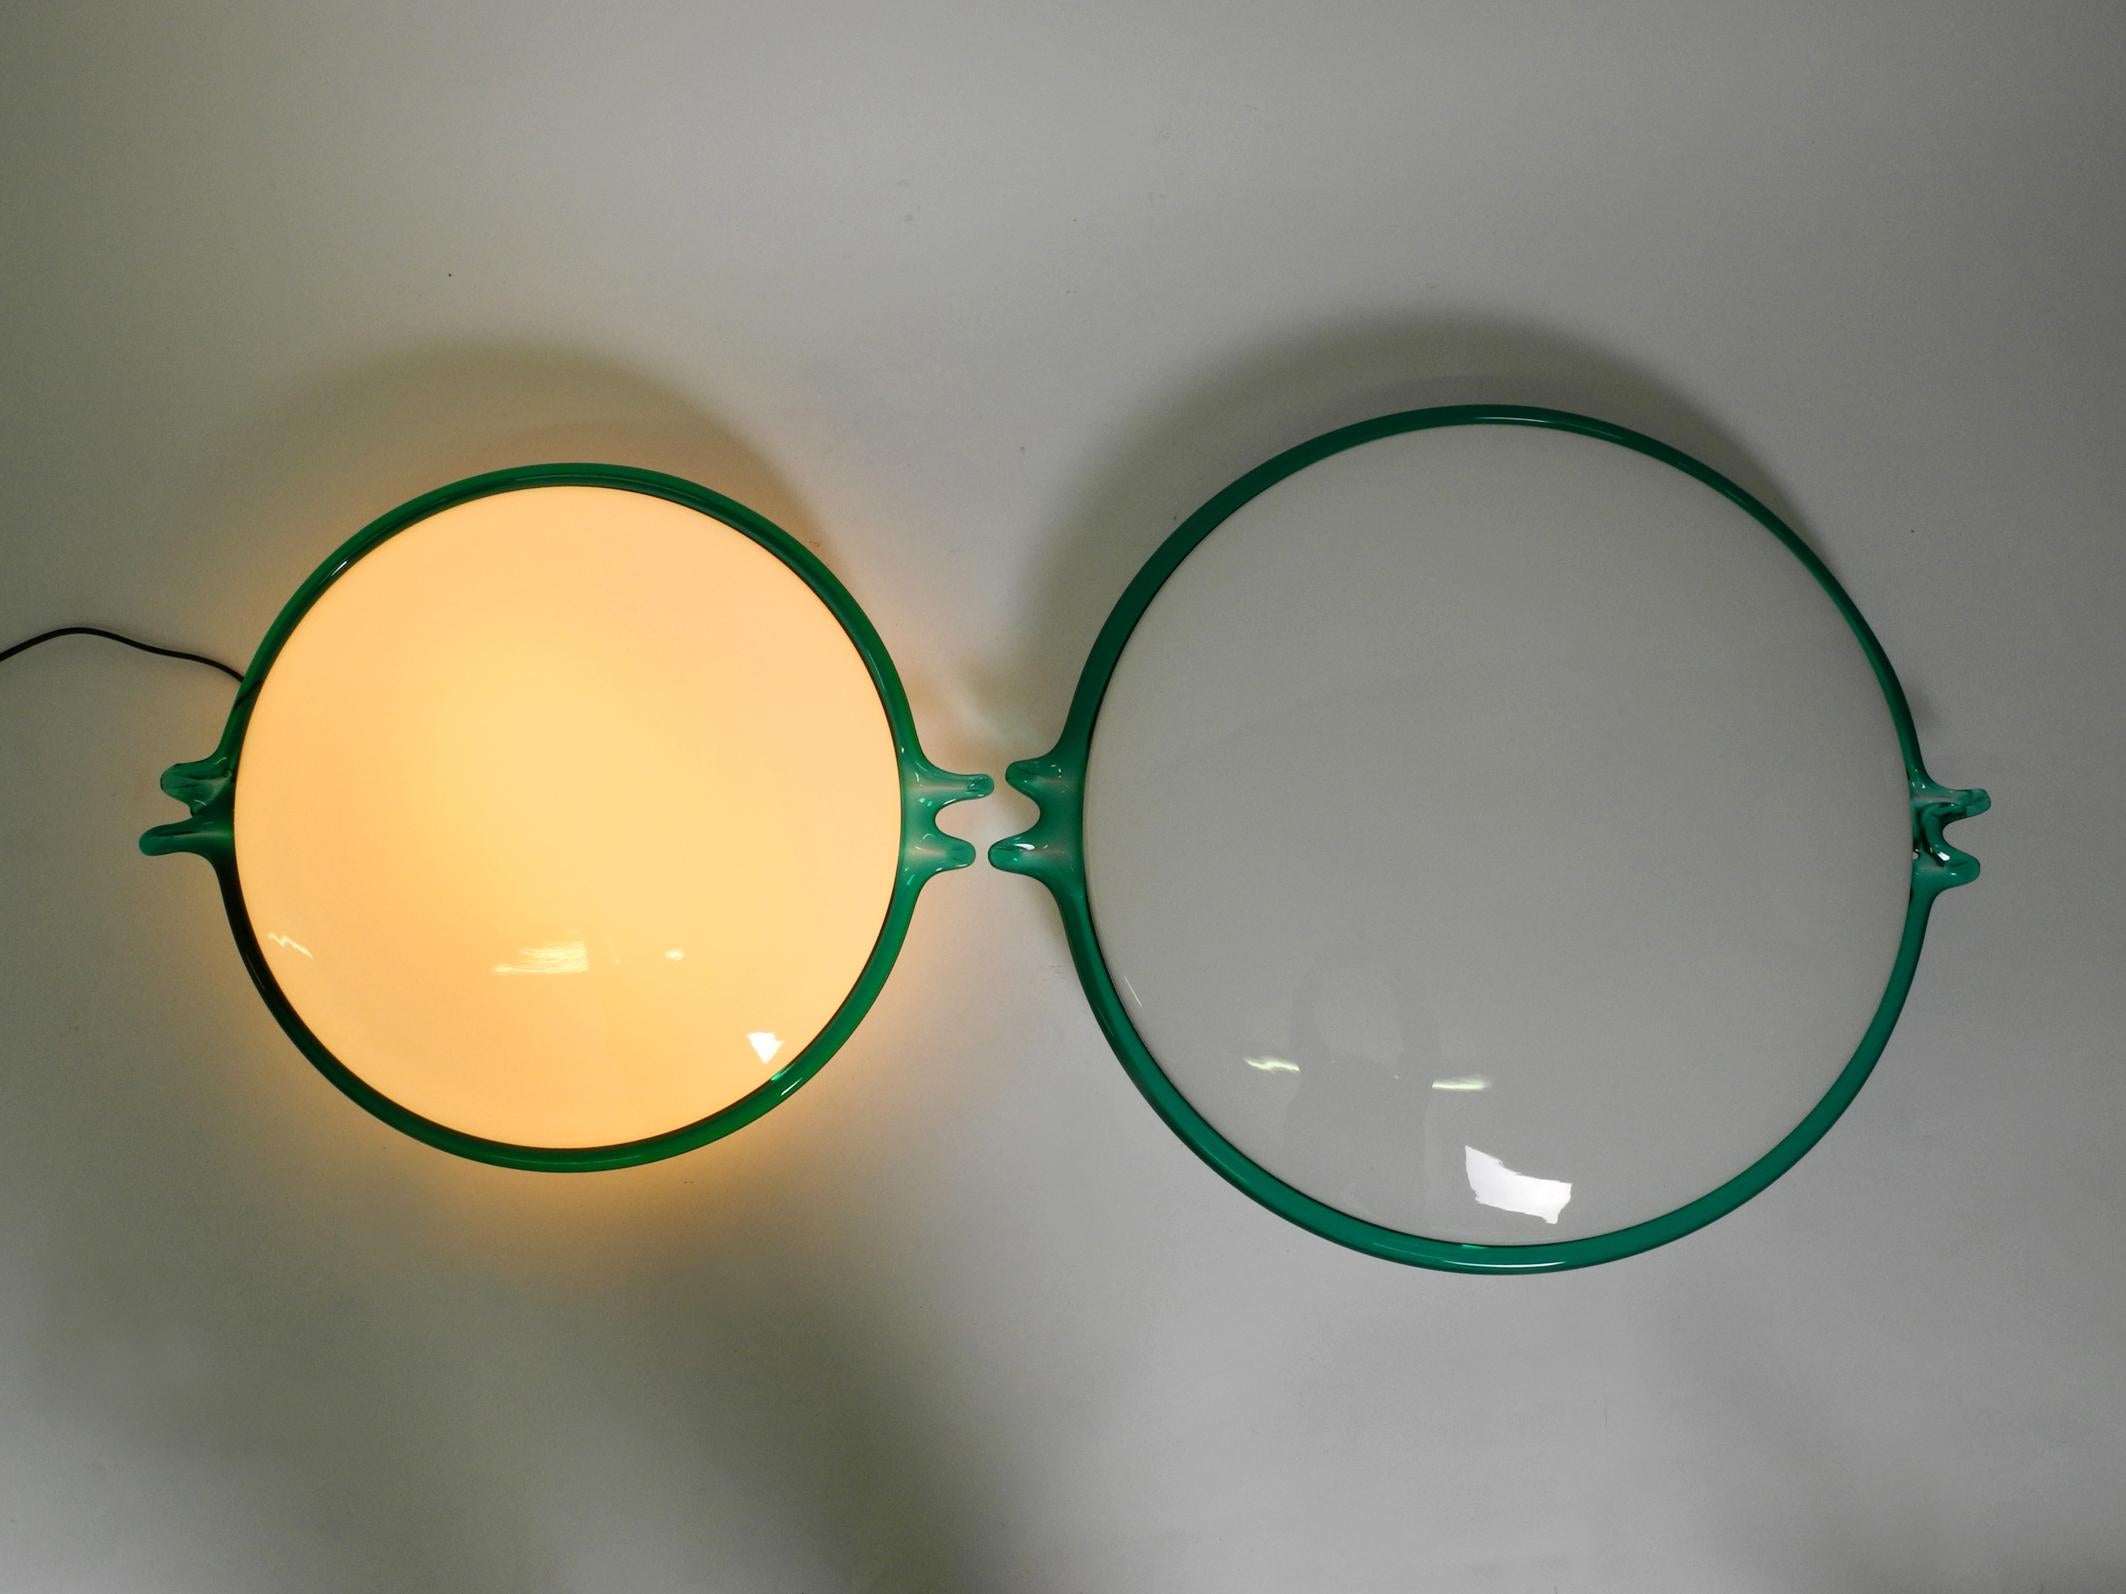 Two beautiful rare 1960s Italian ceiling or wall lamps handmade from Murano glass.
Great minimalist mid century design. Inside made of white Murano glass, 
the edge is made of slightly transparent green glass.
There is a small crack from below on